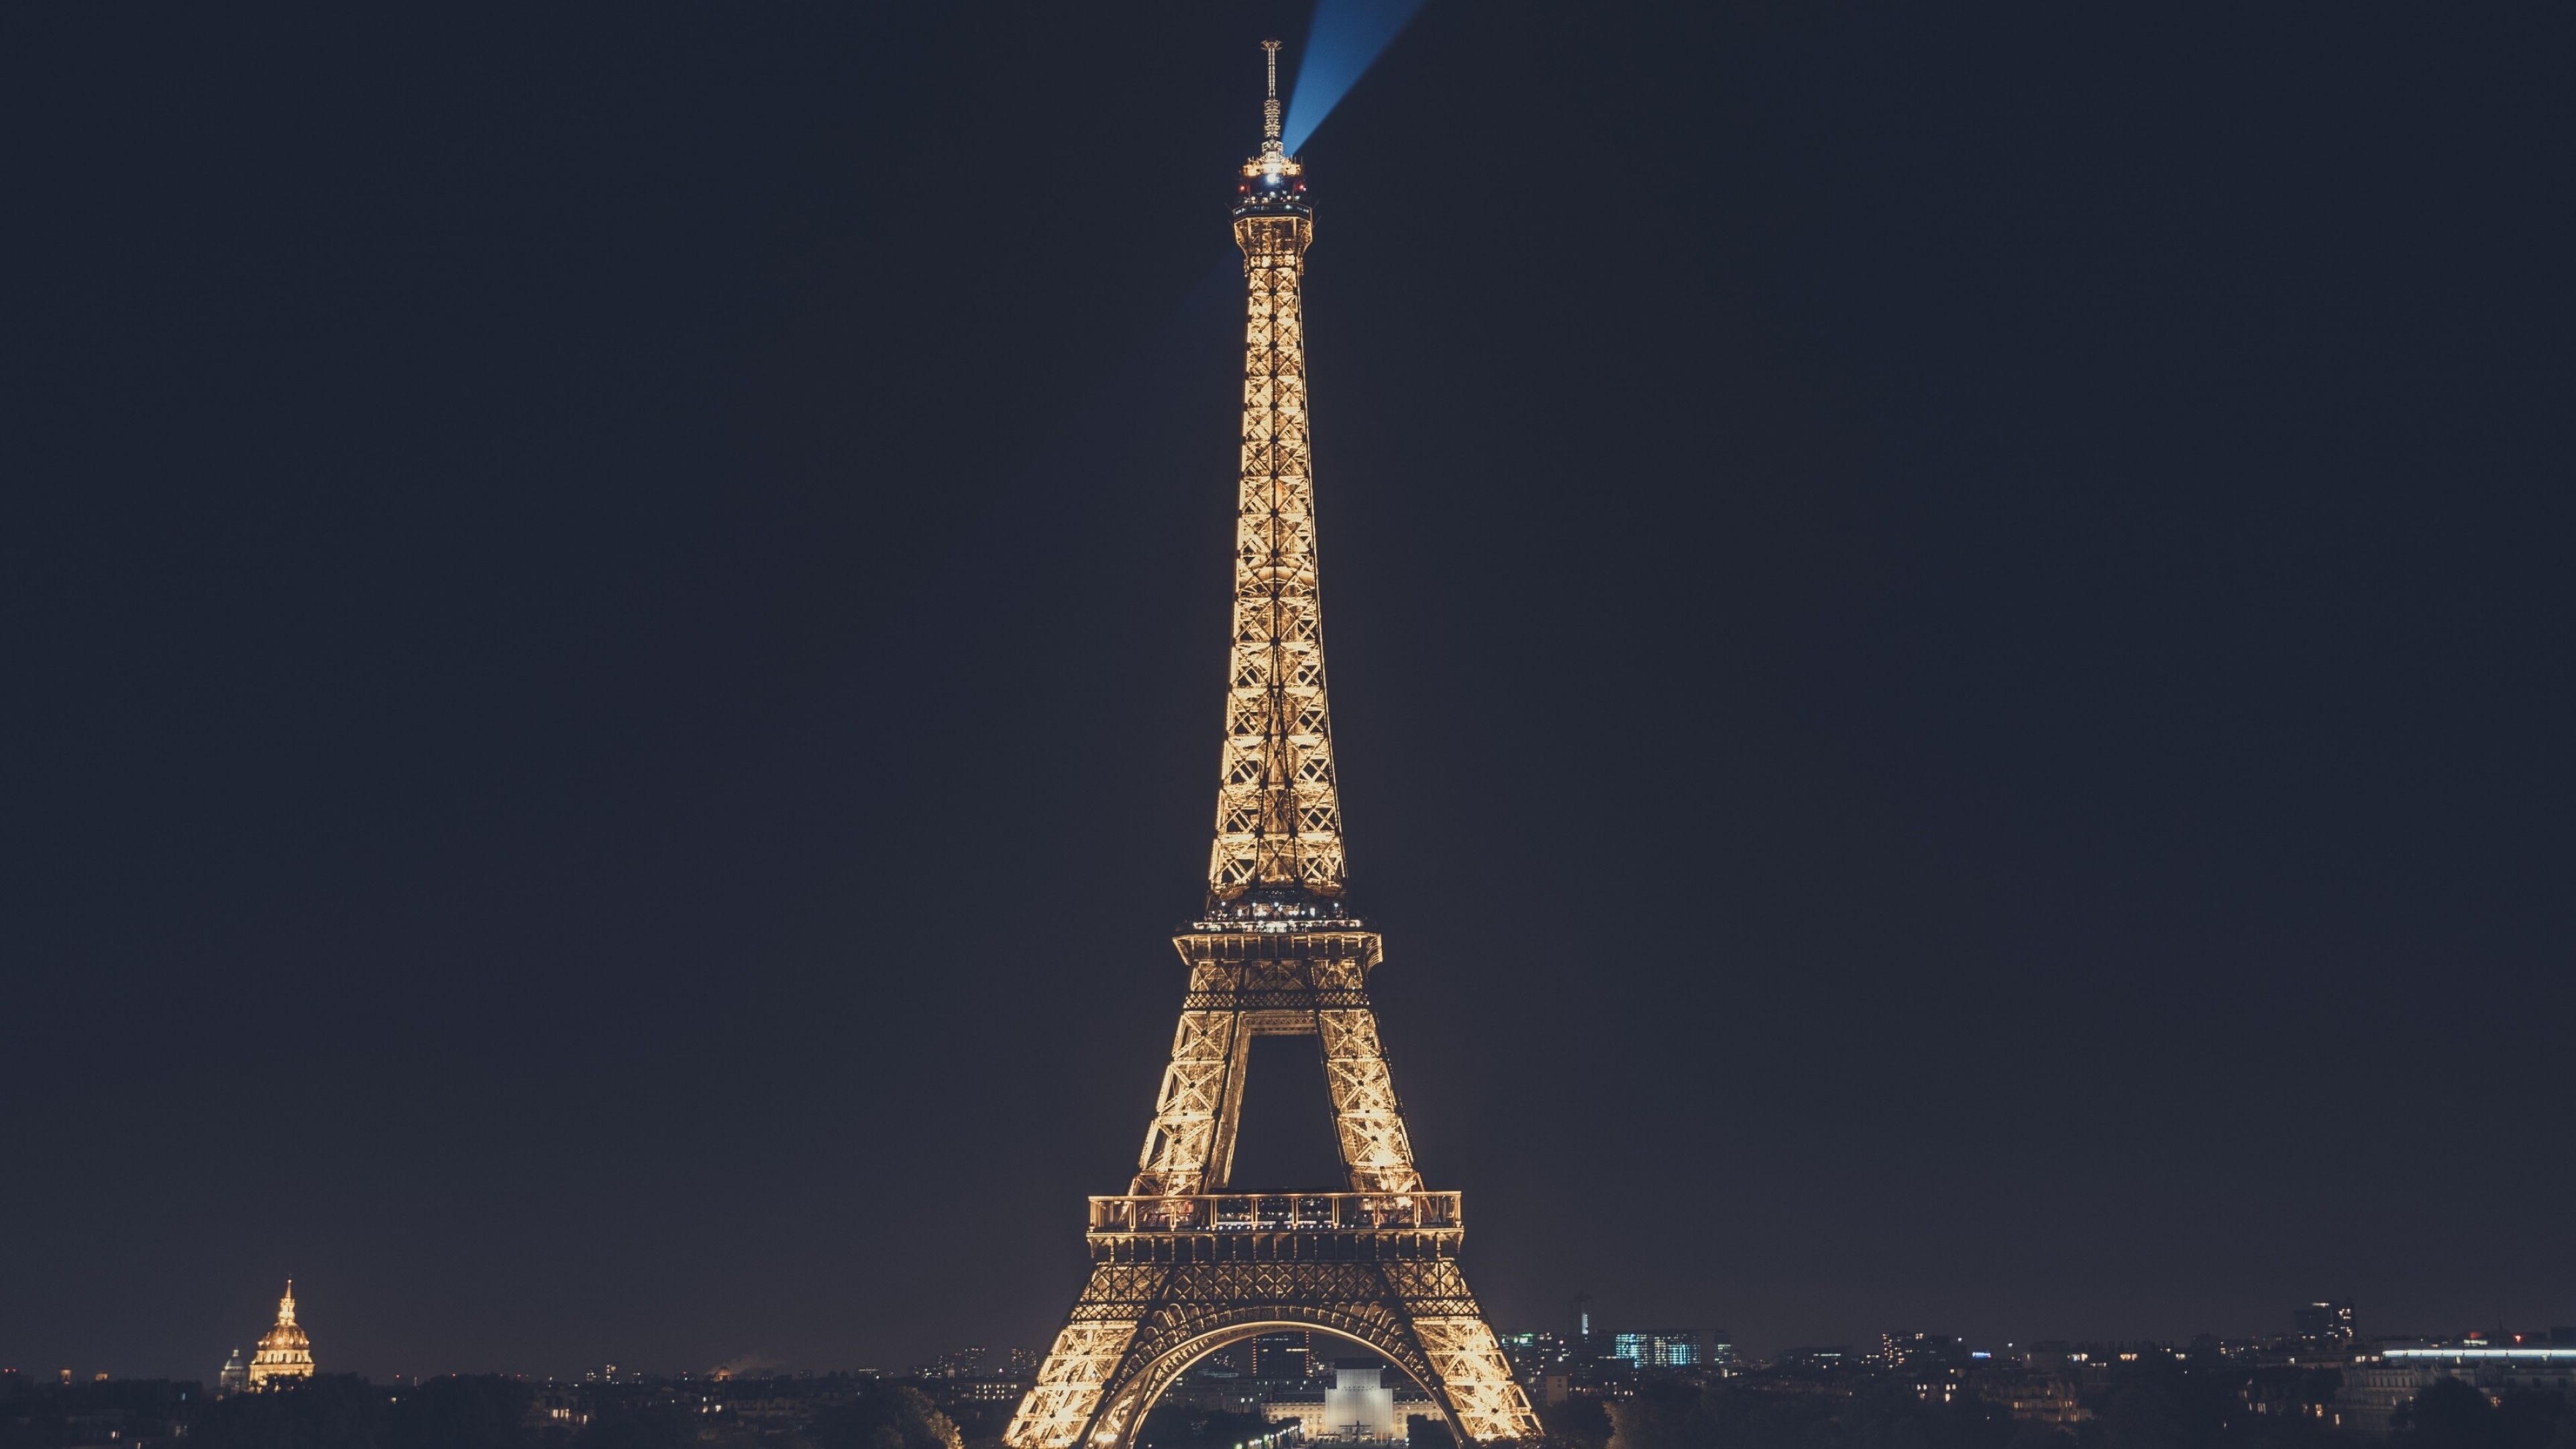 France: Eiffel Tower, Paris, The country has the largest exclusive economic zone in the world. 3840x2160 4K Wallpaper.